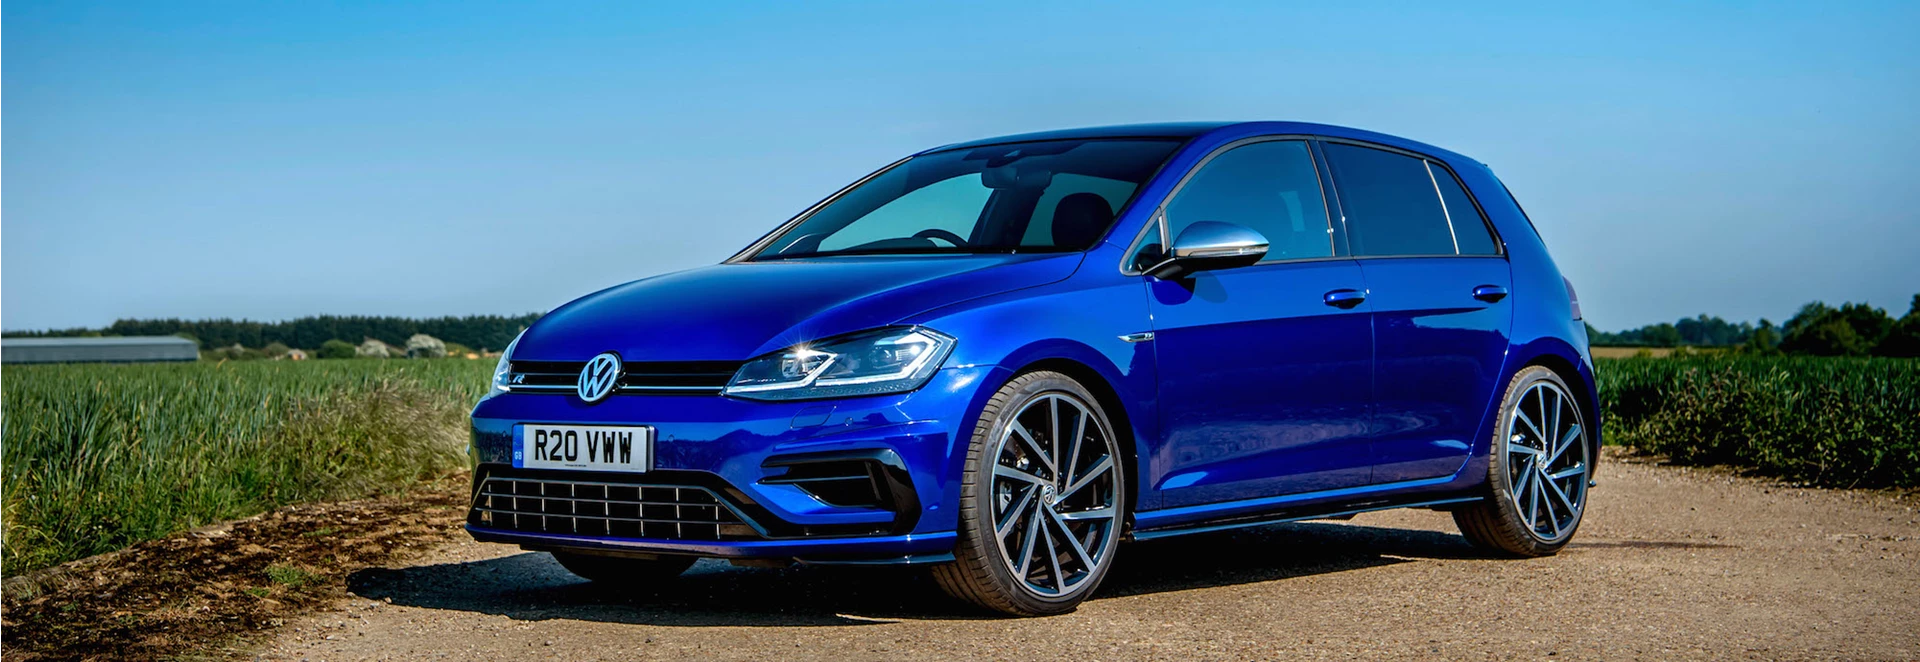 2018 Volkswagen Golf R Performance Pack Review